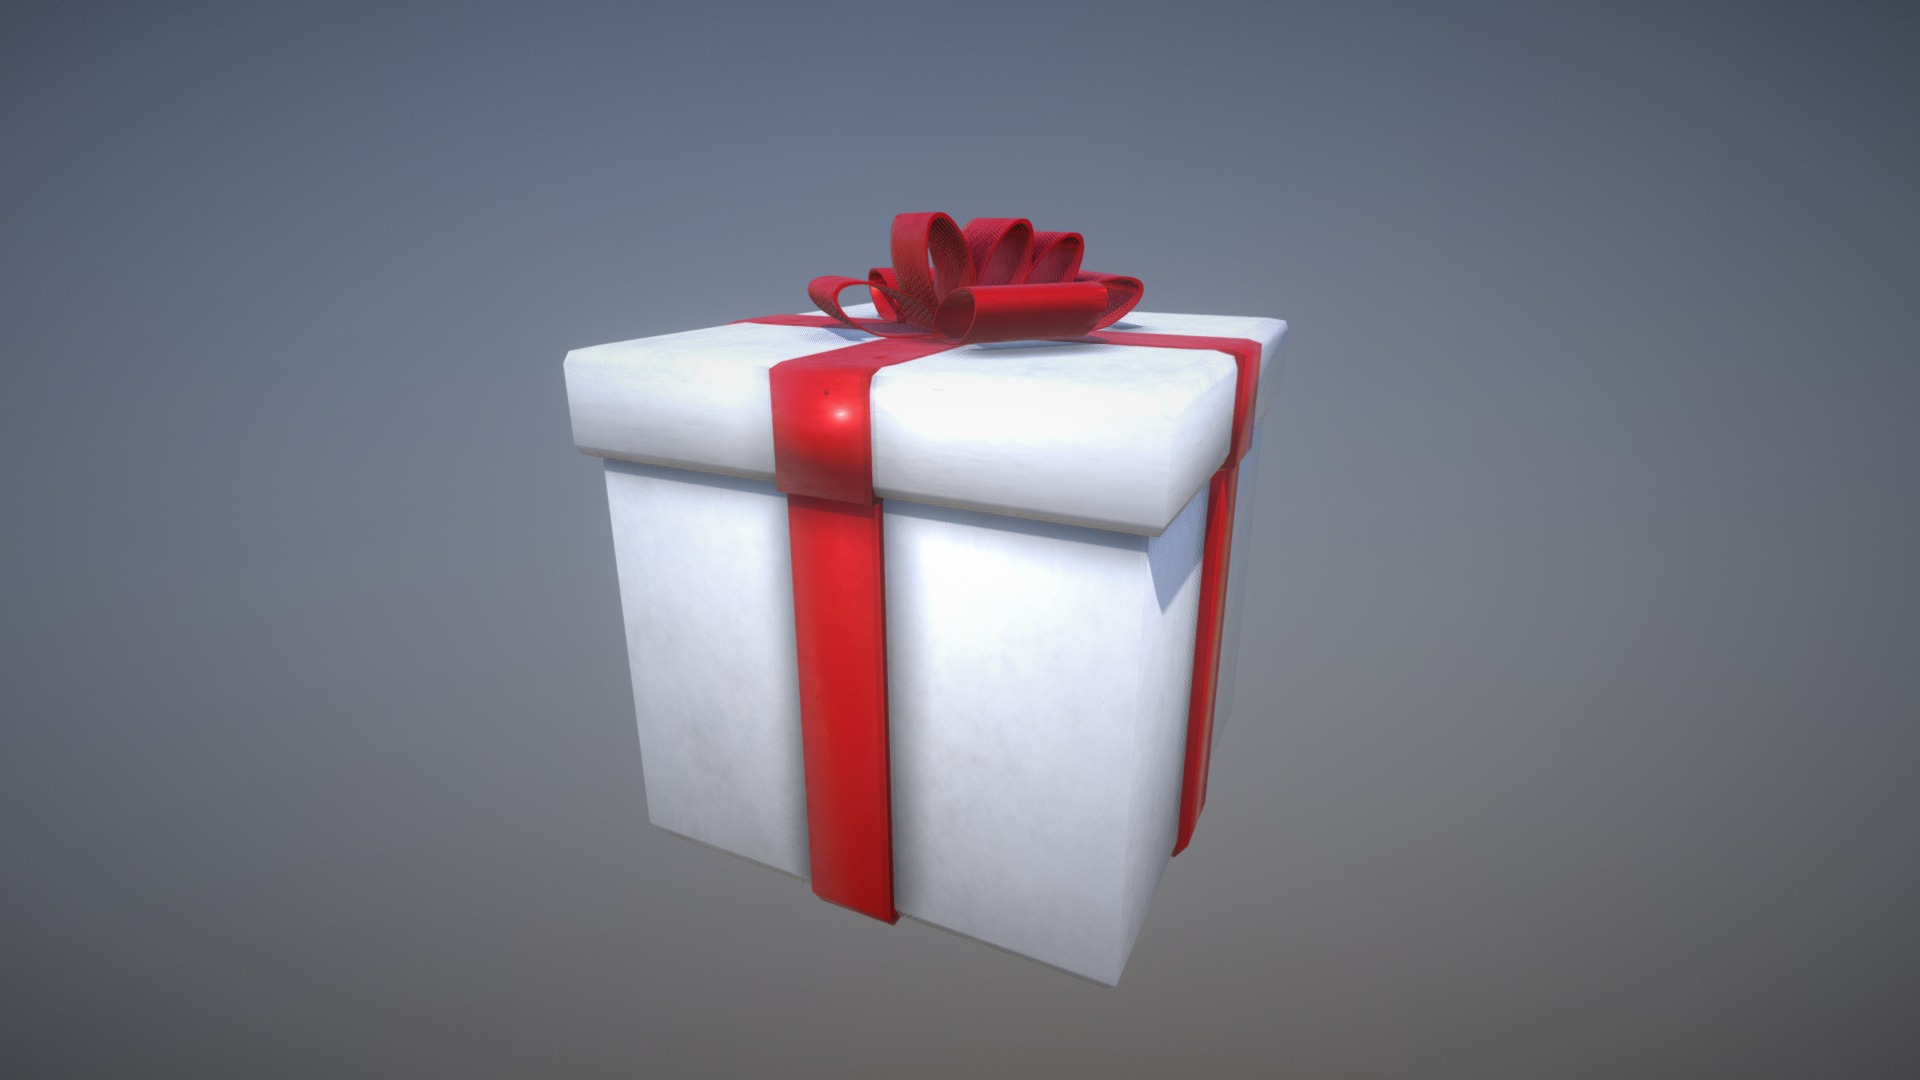 2nd version of a present I did recently.
Made in Blender.
Feel free to use the model for whatever you want, but credit is appreciated 3d model